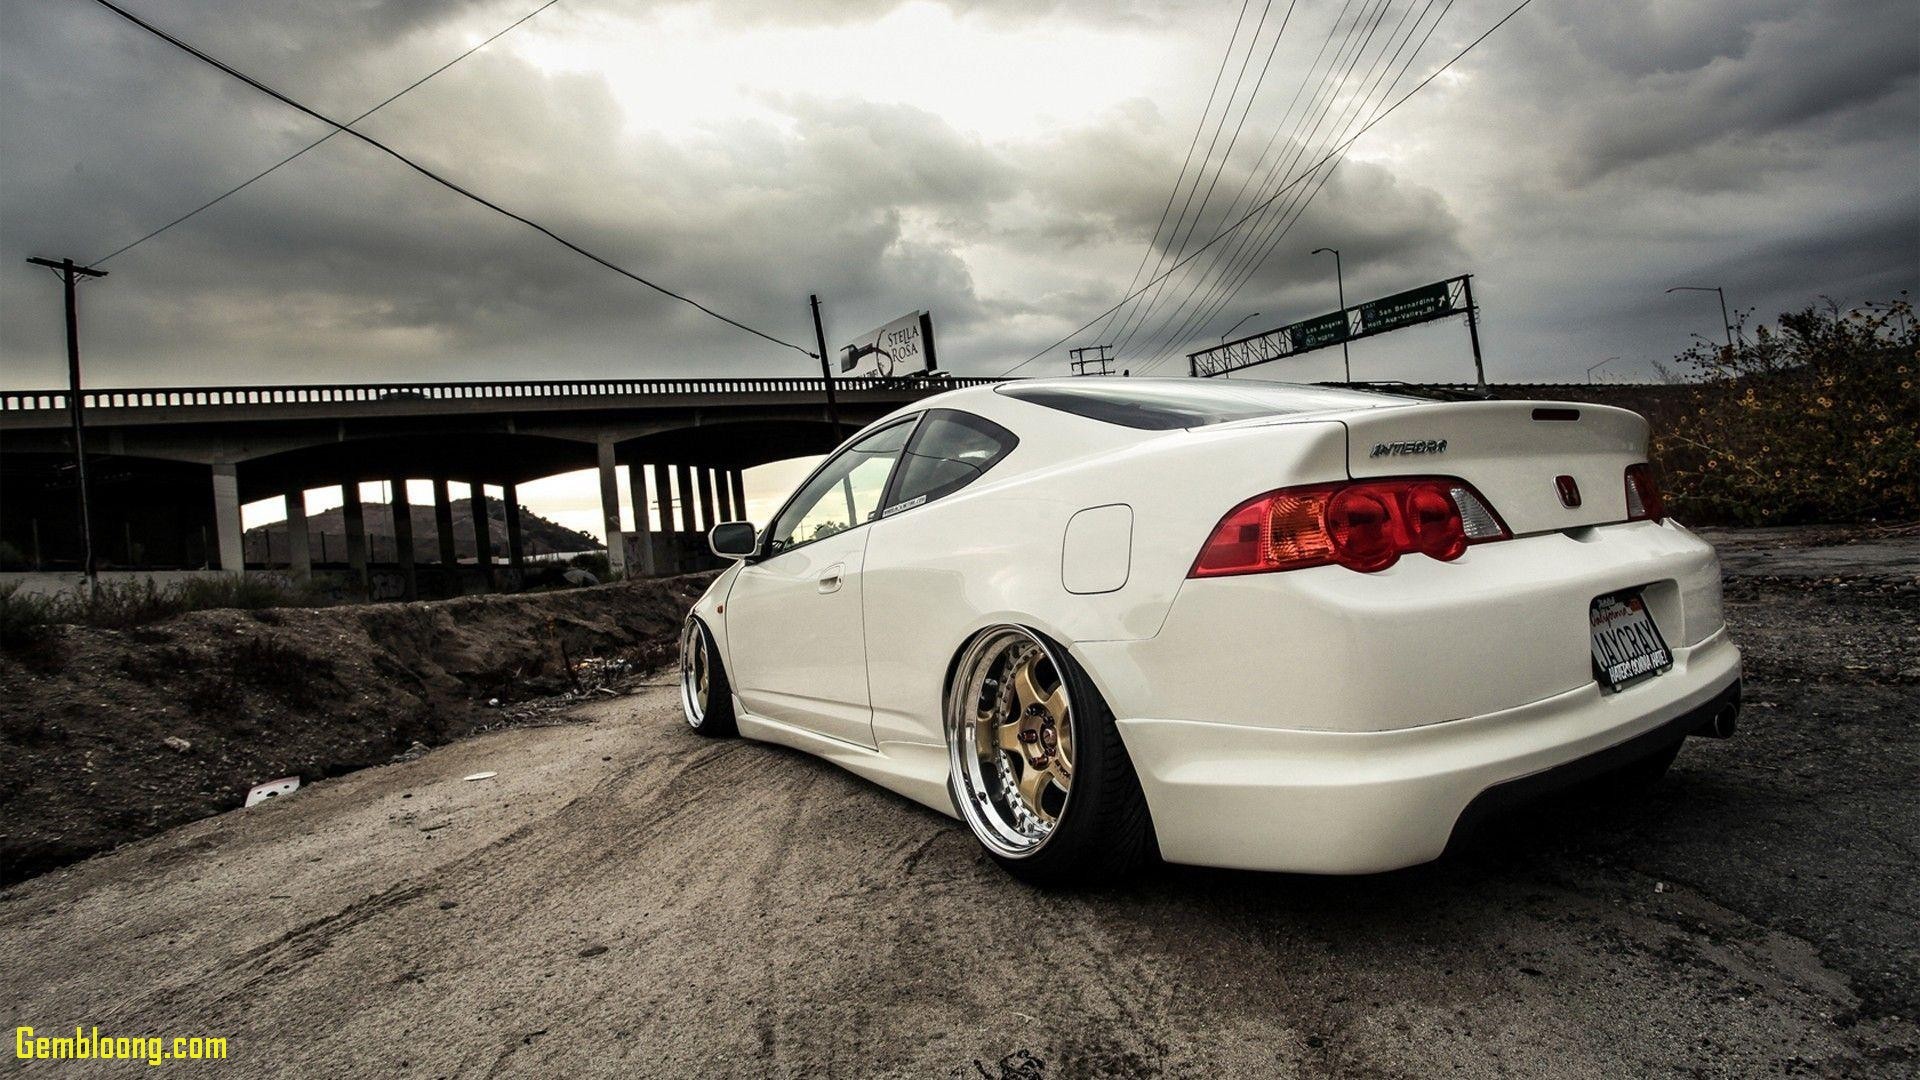 1920x1080 Rsx Wallpapers Unique Acura Rsx Wallpapers Wallpaper Cave